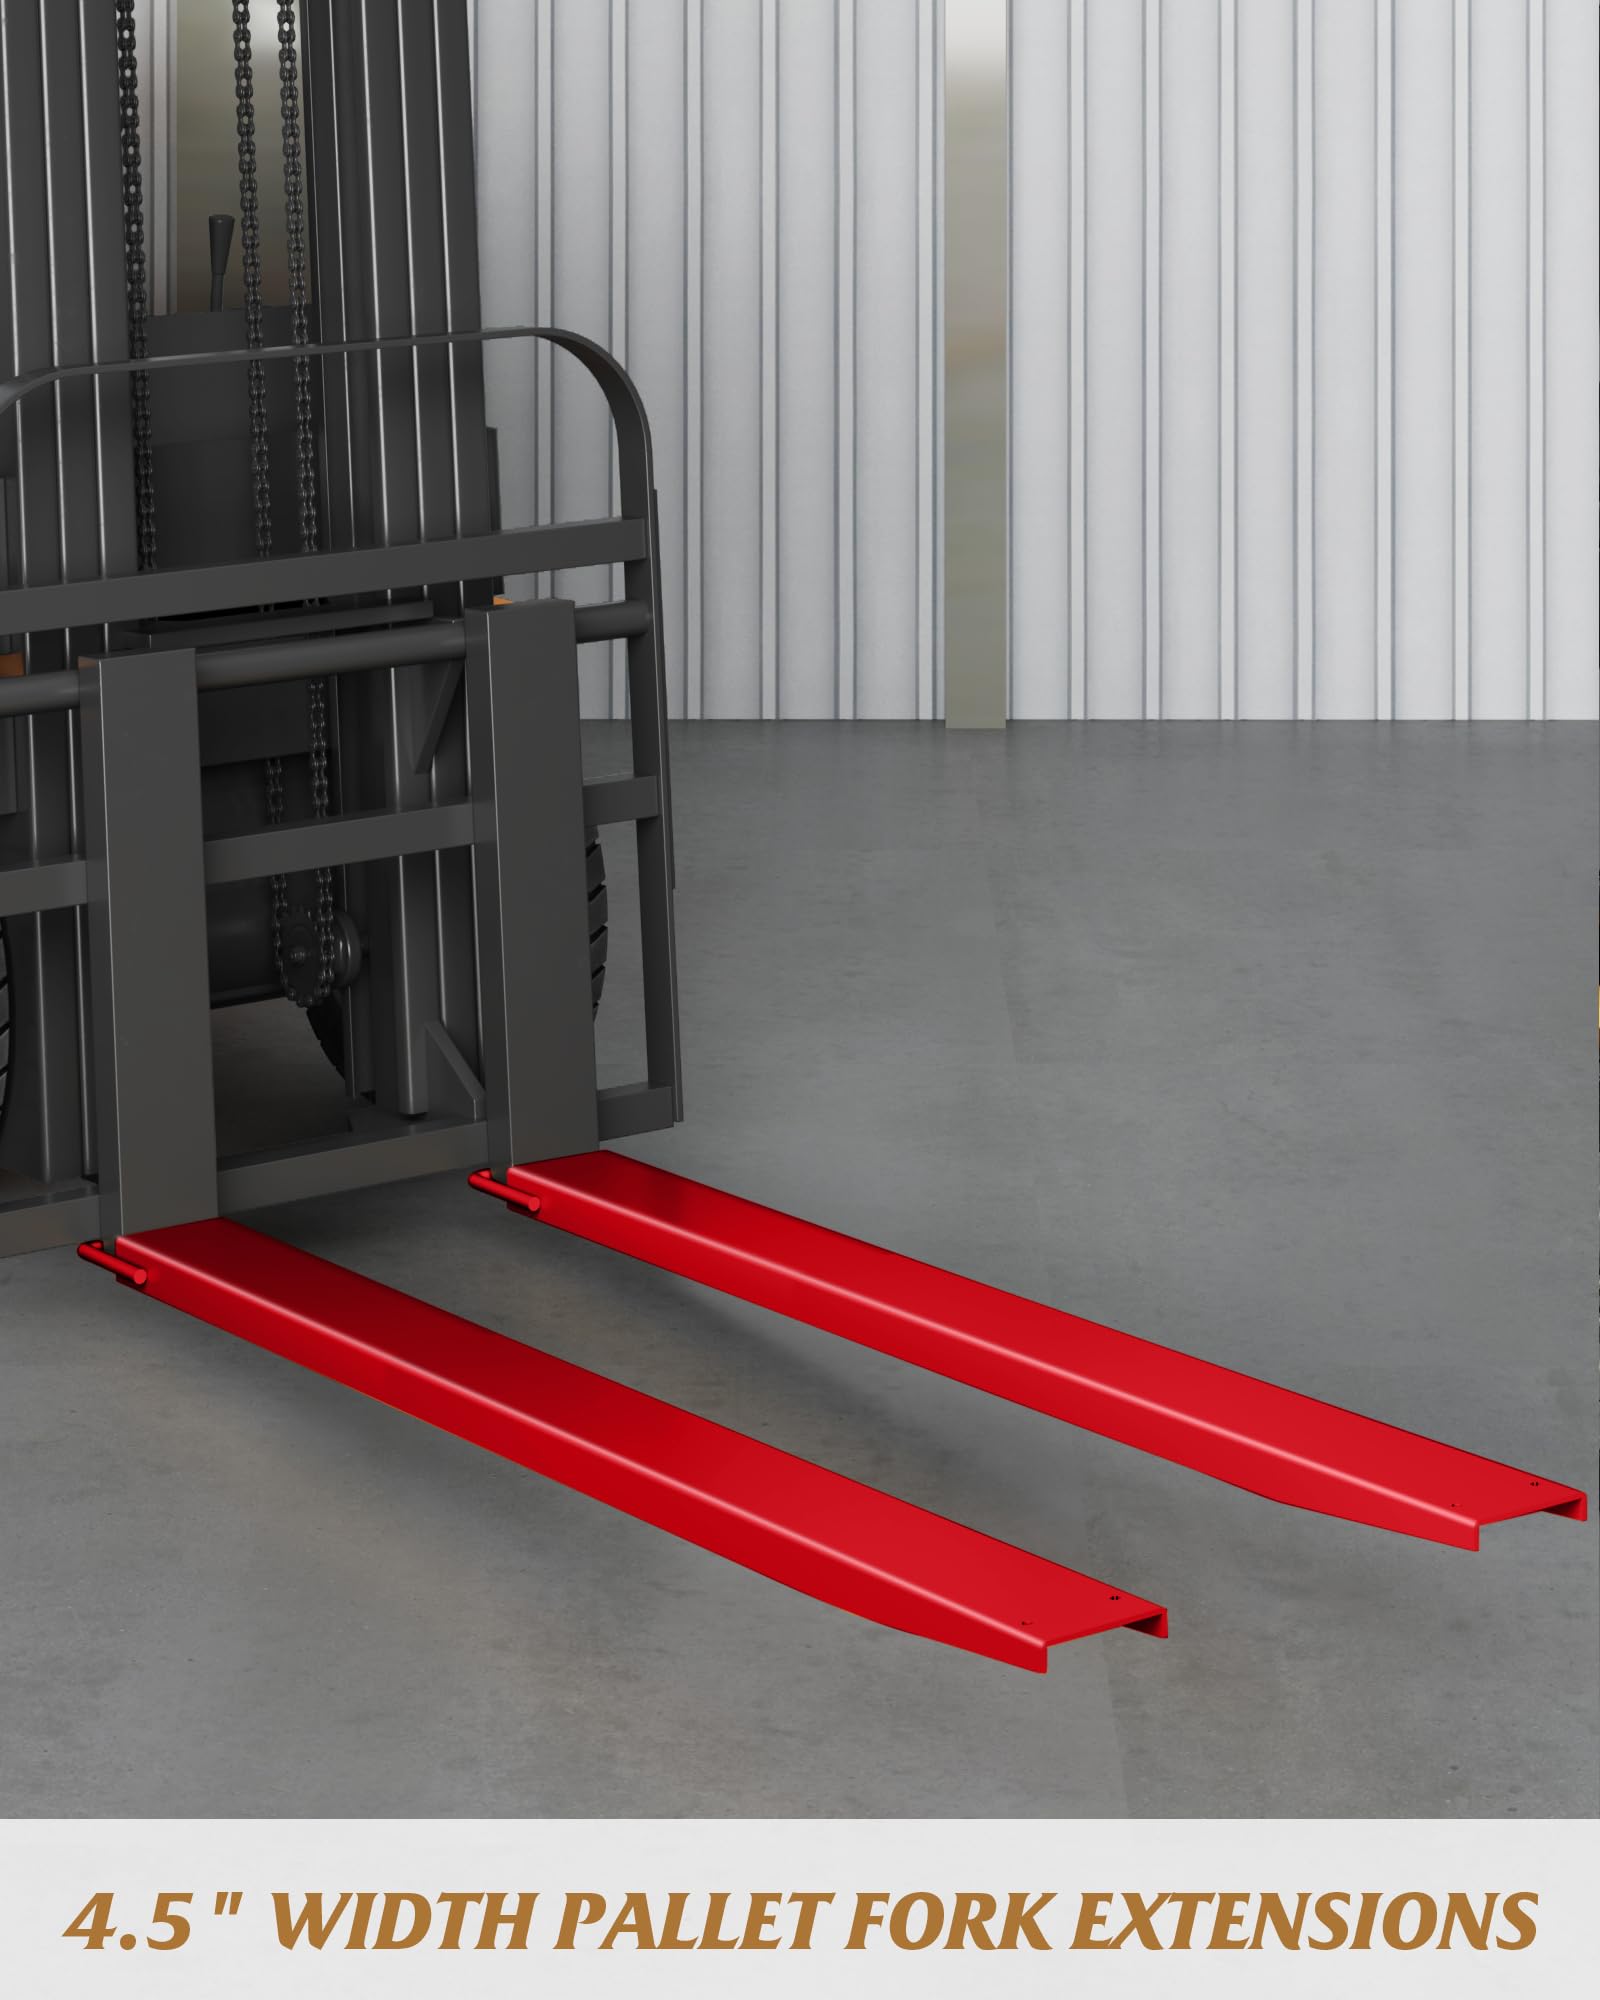 Forklift Extensions,4.5 Inch Width Pallet Fork Extensions, Heavy Duty Sliding Forklift Attachment, 1 Pair Fork Extensions for Forklift, Red